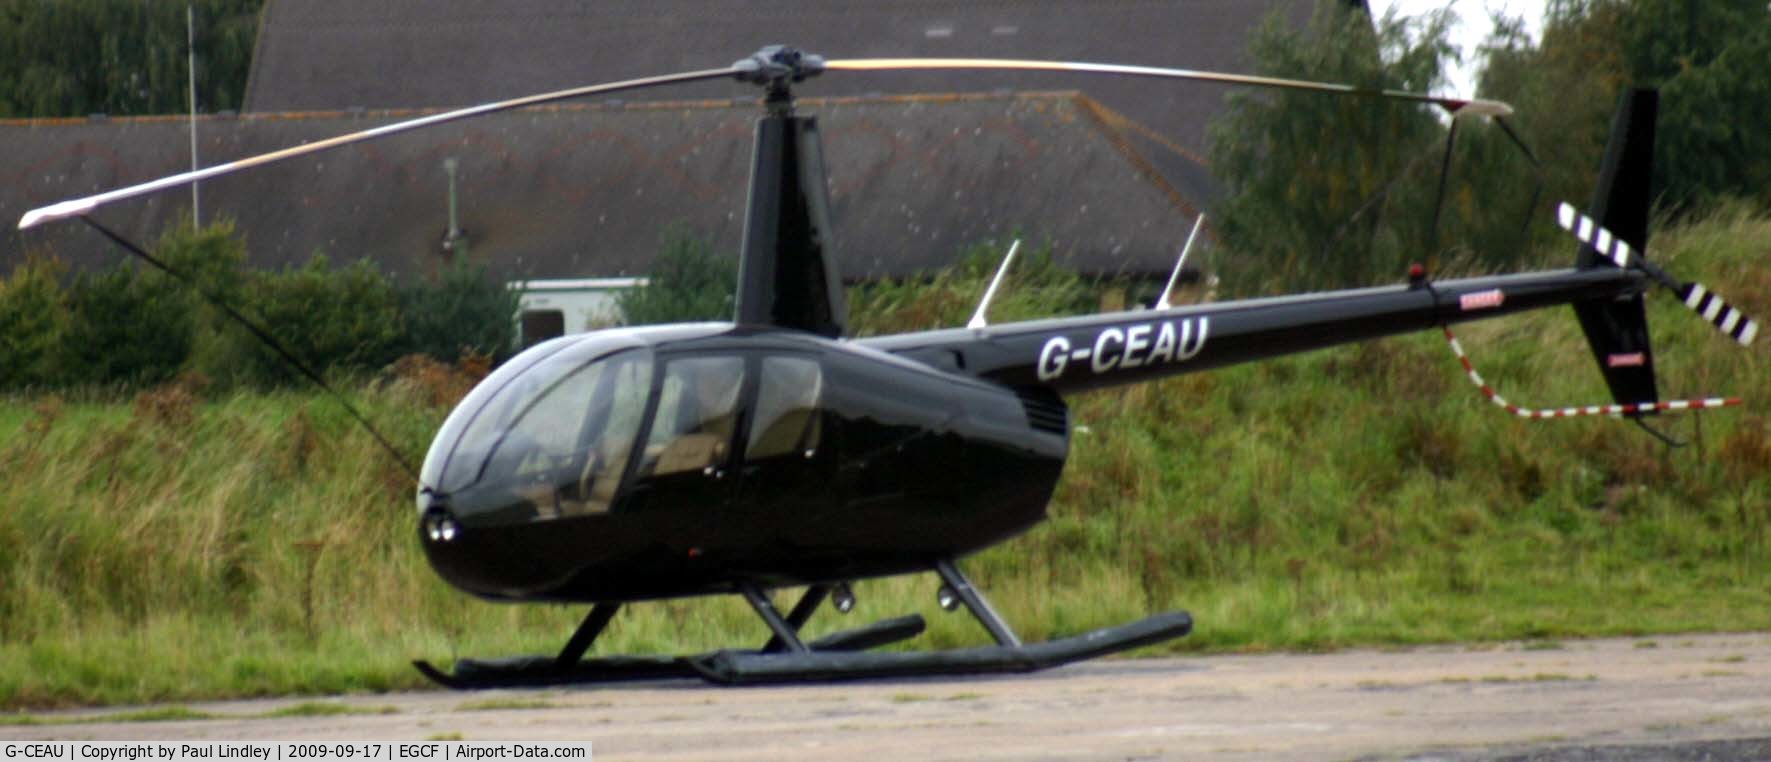 G-CEAU, 2006 Robinson R44 Raven II C/N 11311, Parked up for Lunch